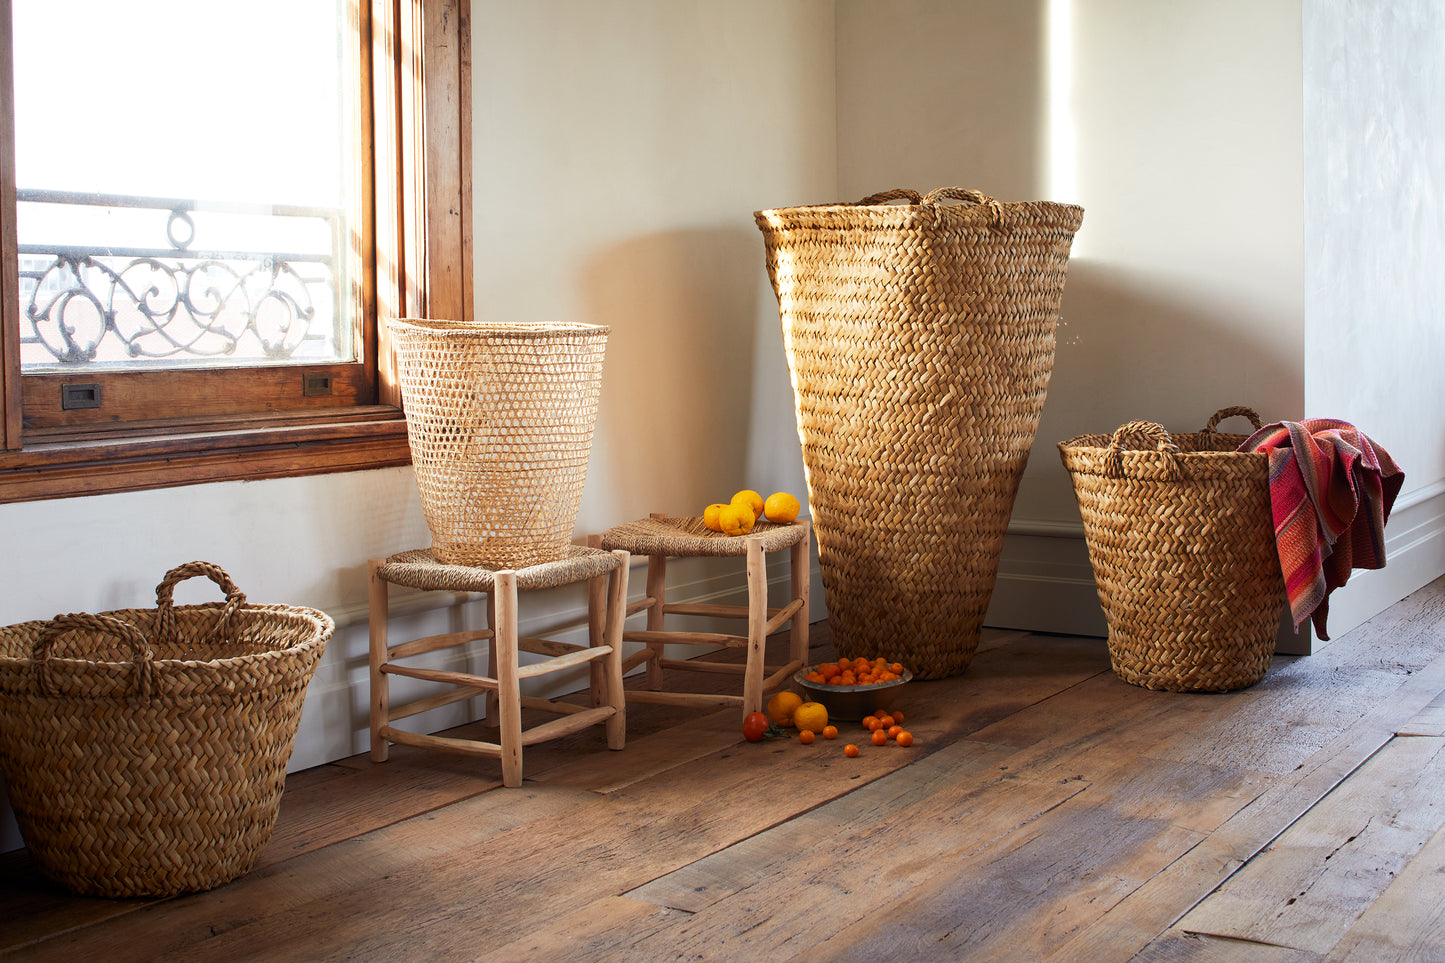 African Flat Basket - The TAYLOR'd Home